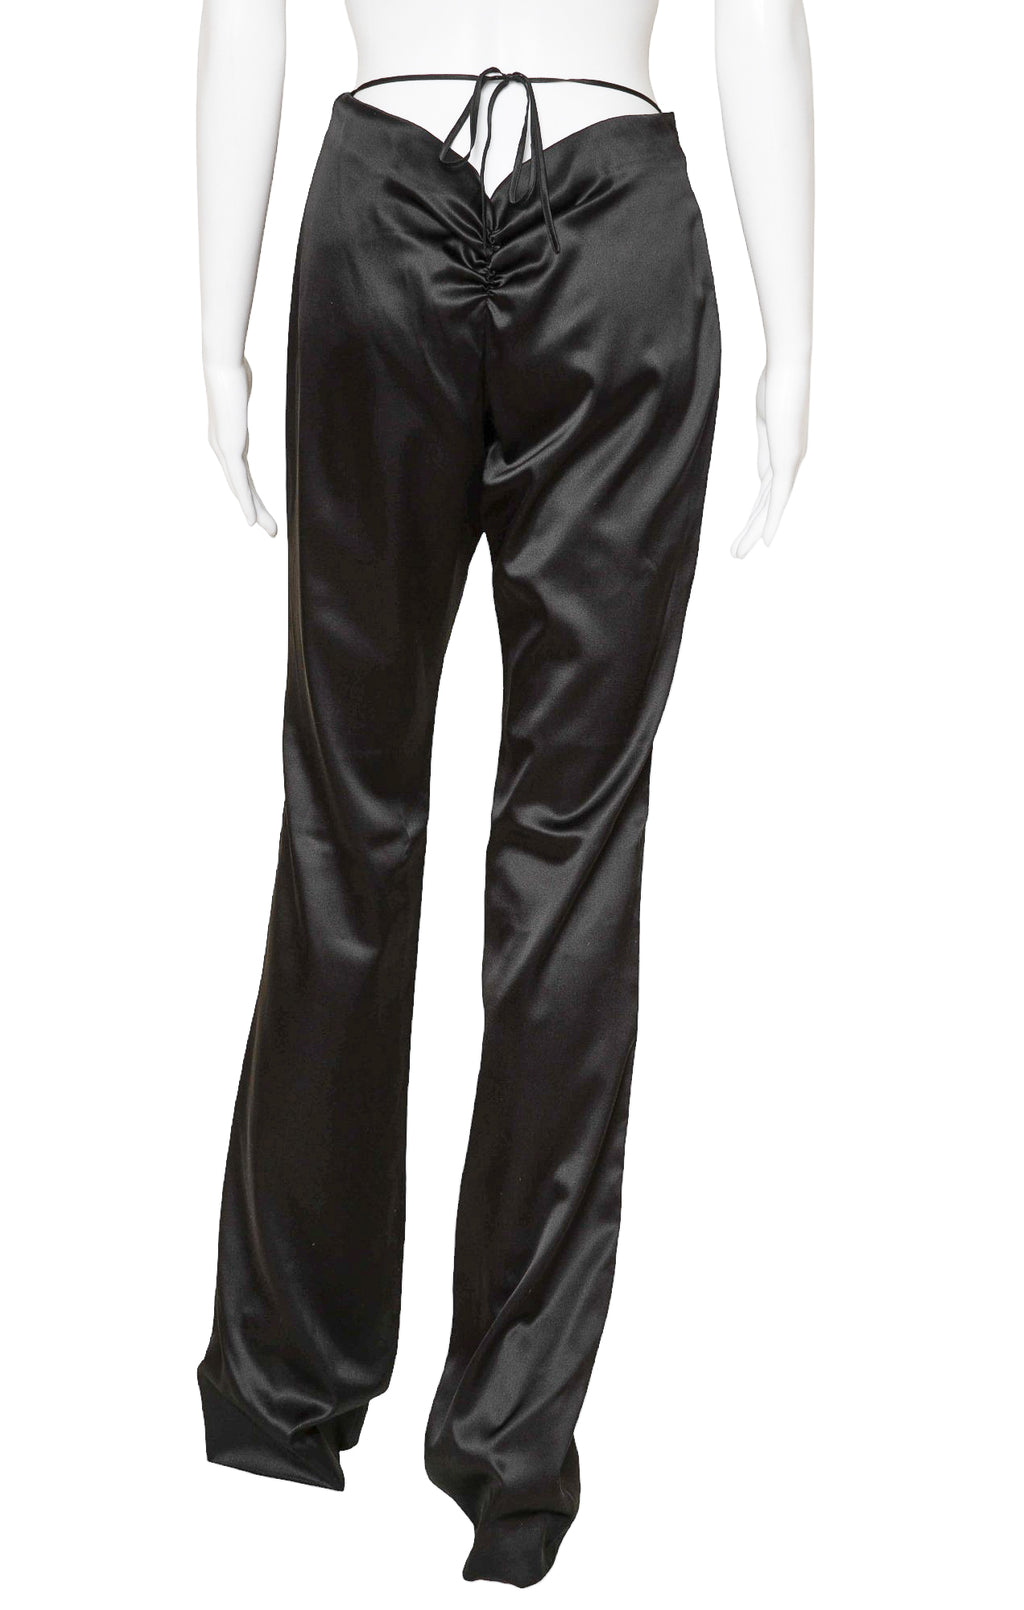 ALESSANDRA RICH (NEW) with tags Pants Size: IT 42 / Comparable to US 4-6